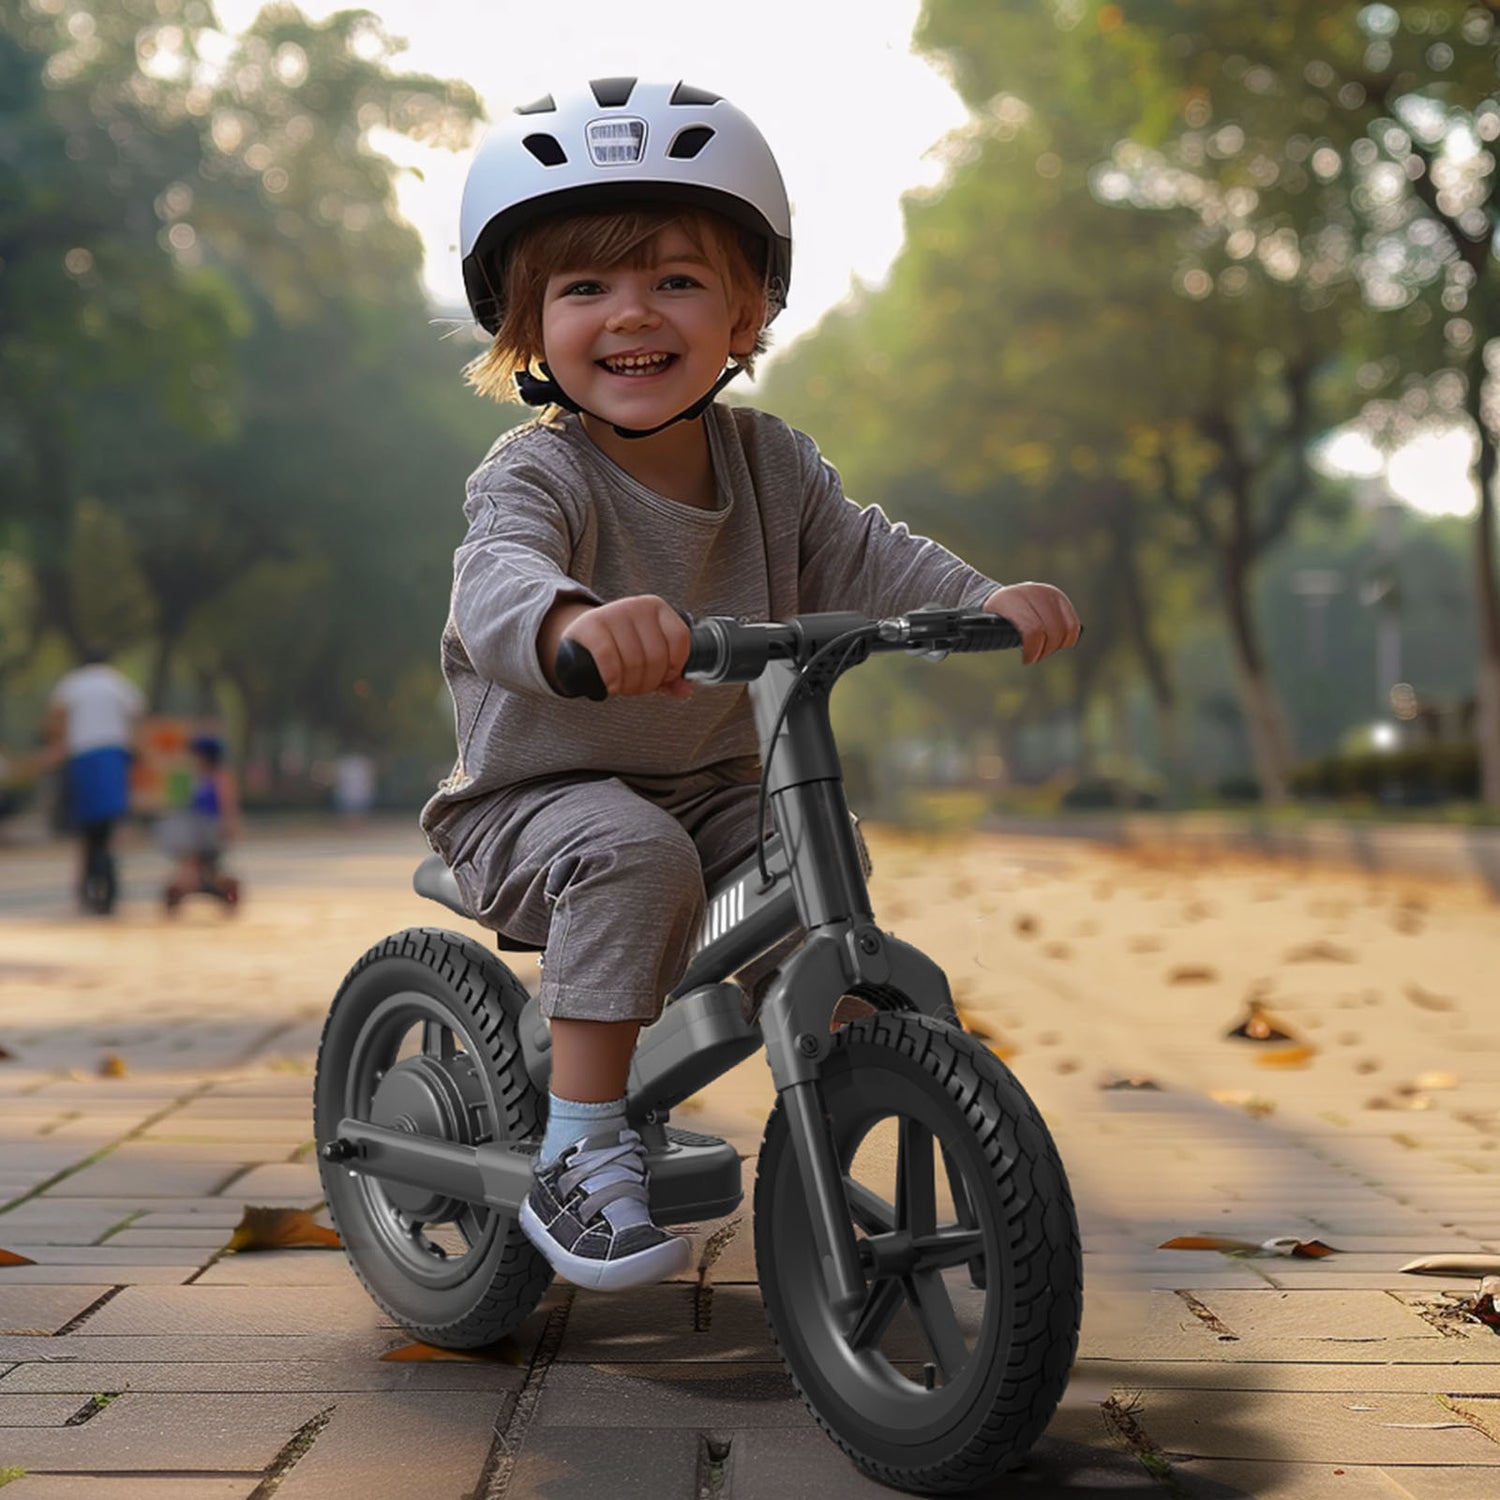 XJD 24V 150W Kids Electric Bike: A Gateway to Safe and Thrilling Adventures